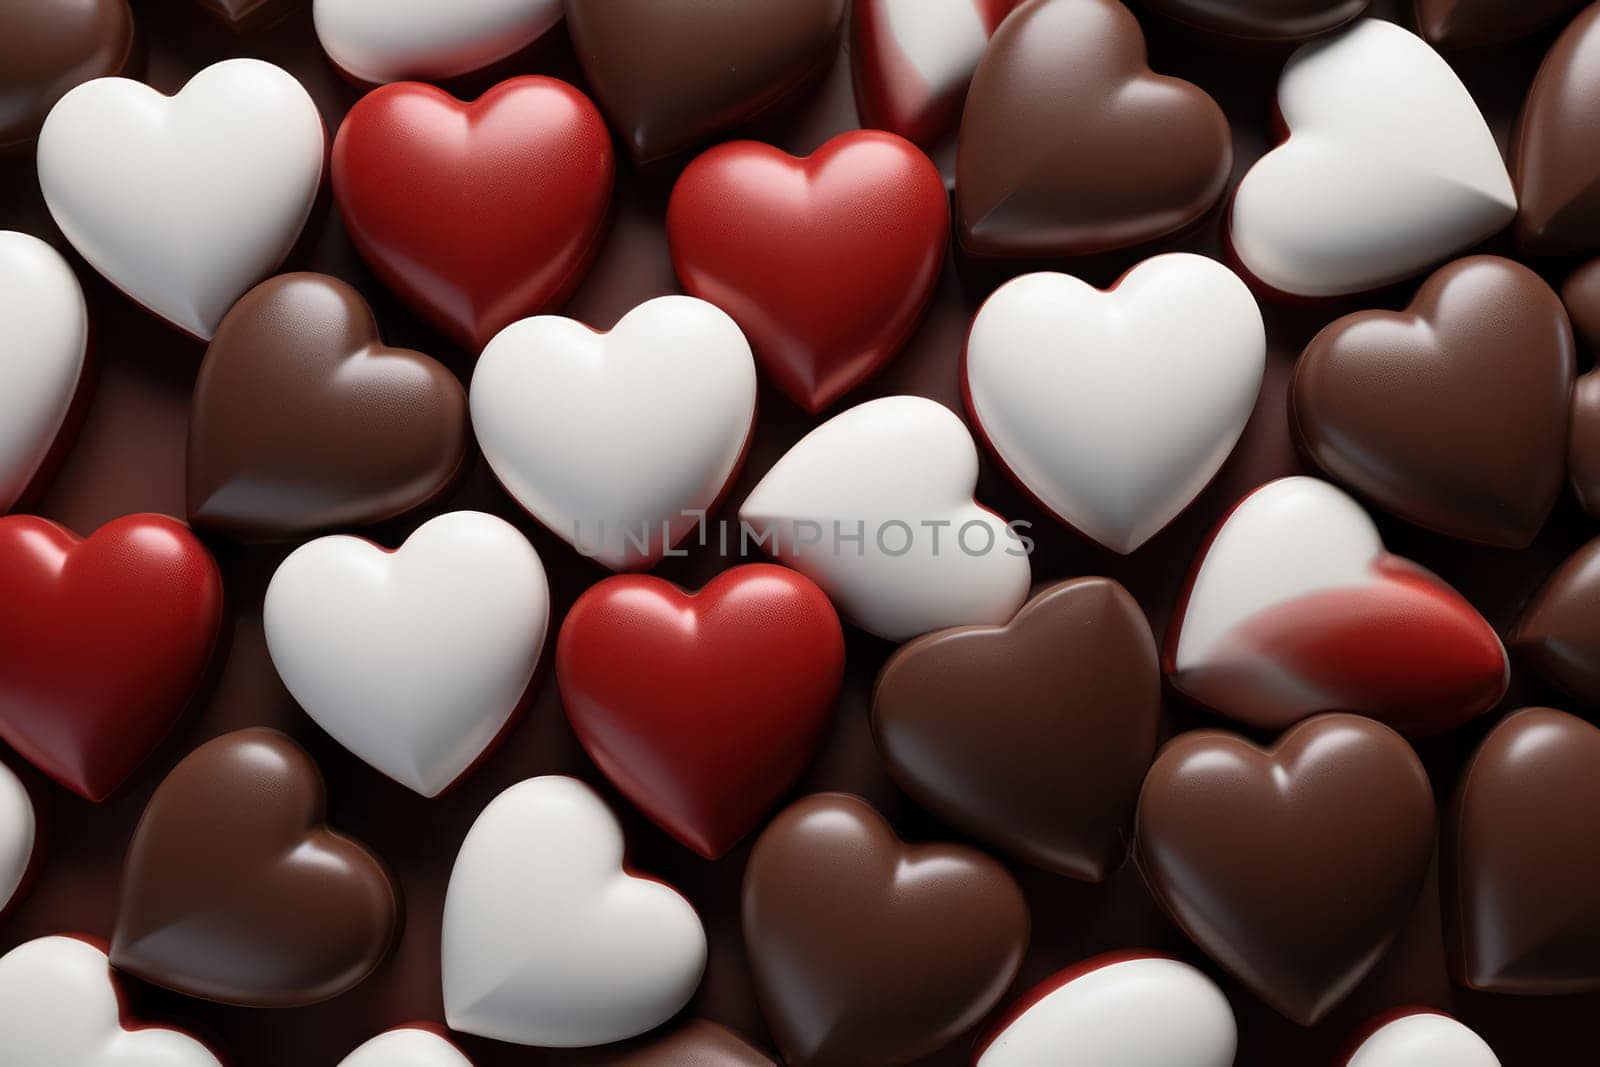 Romantic Love: Heart-shaped Candy on Red Valentine Background by Vichizh